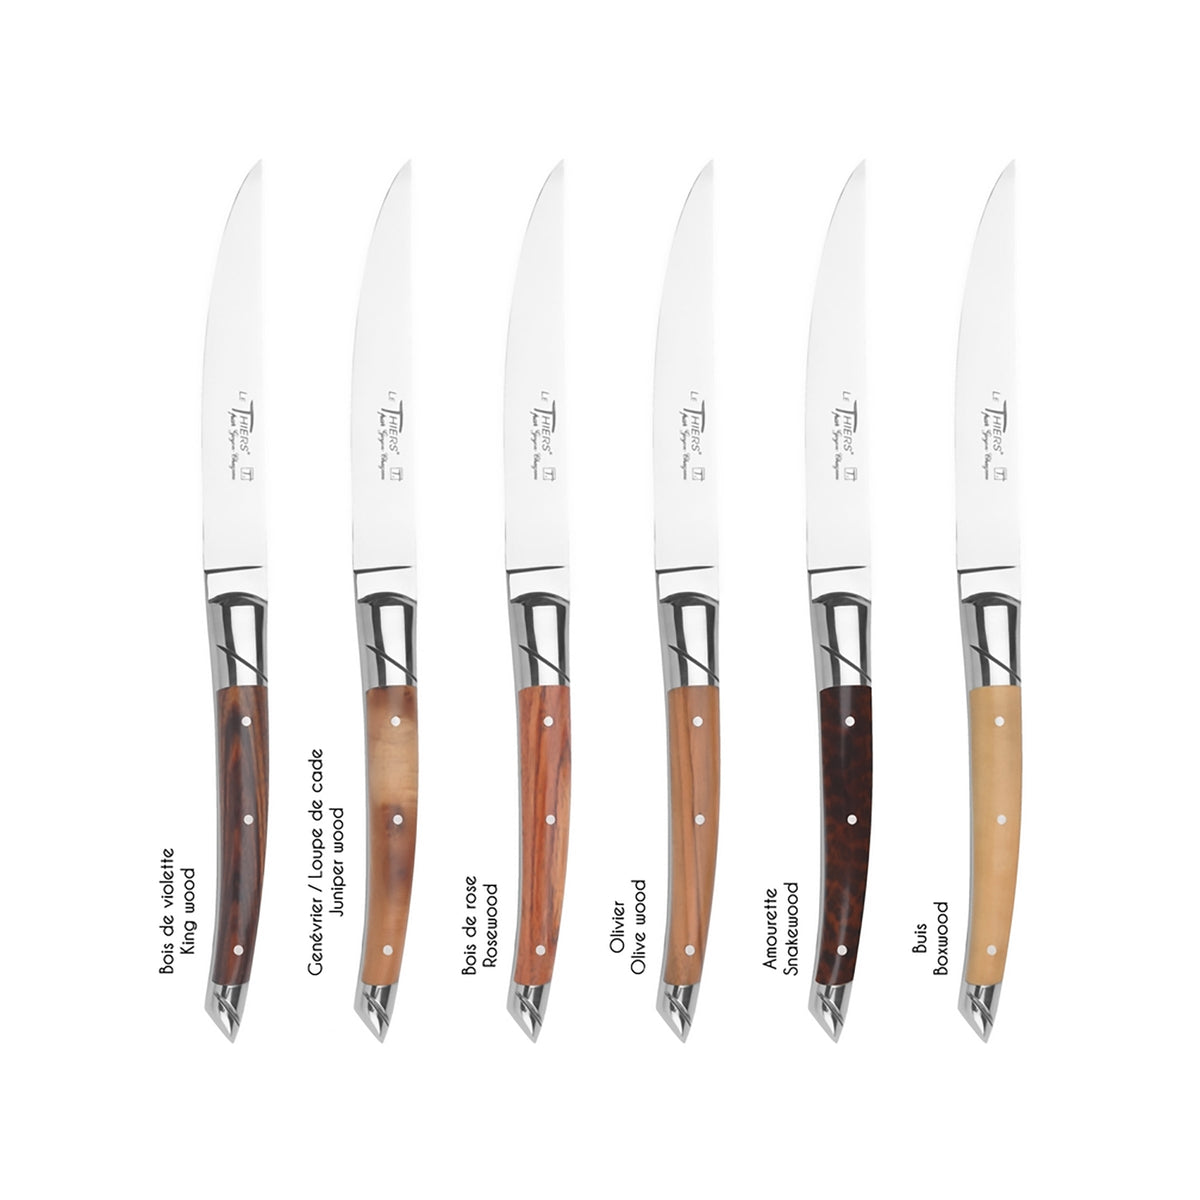 A group of high-quality Goyon-Chazeau Mixed Wood Le Thiers Steak Knives Boxed Set/6 with wooden handles, including the Le Thiers knife and Goyon-Chazeau. Perfect for any cutlery enthusiast in the world.